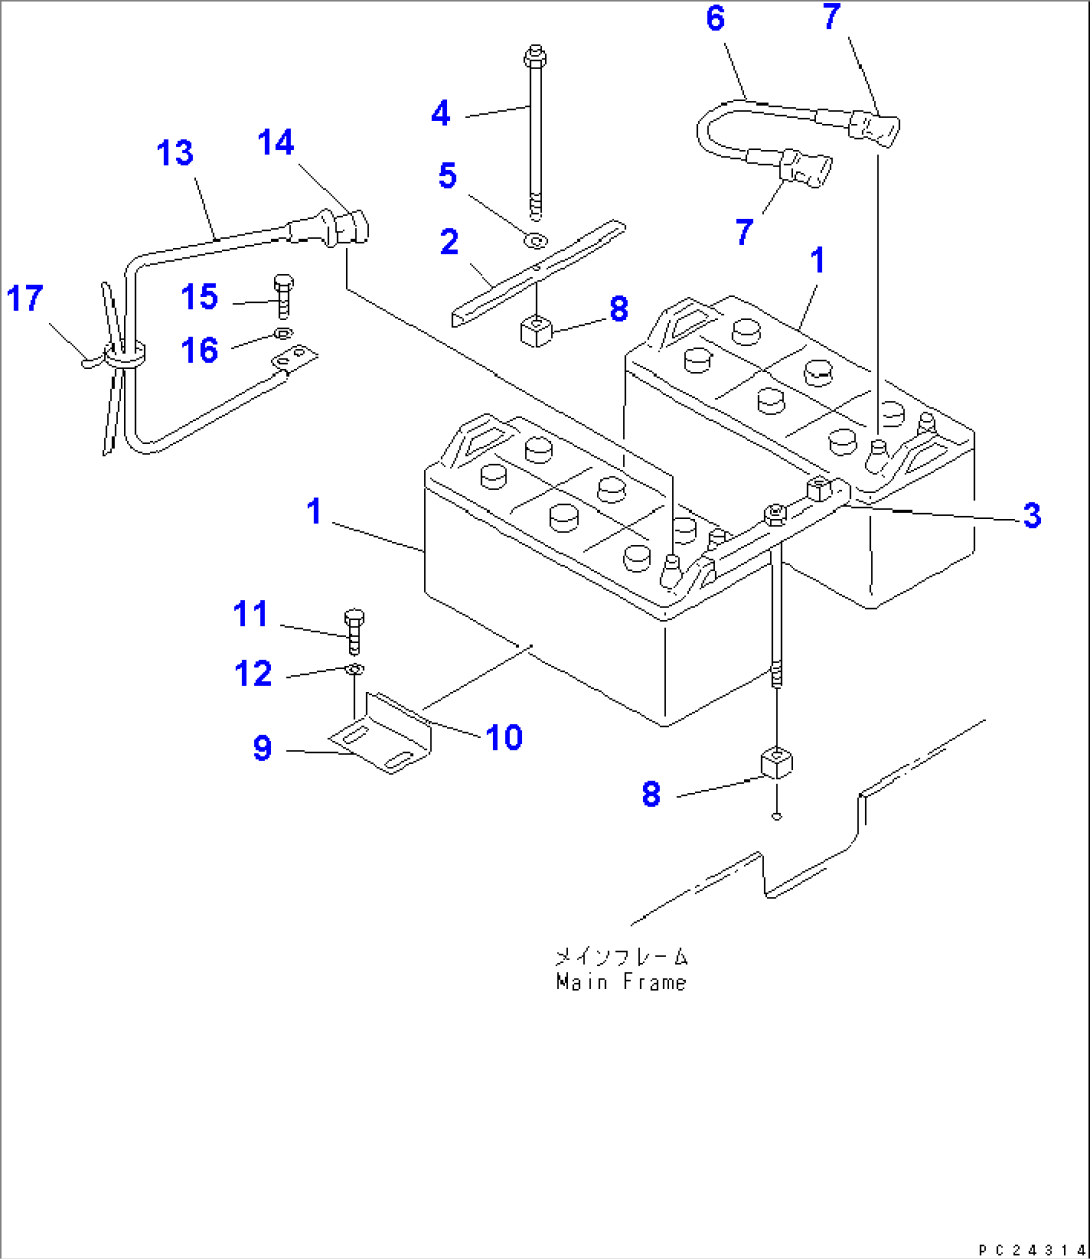 ELECTRICAL SYSTEM (3/10) (BATTERY)